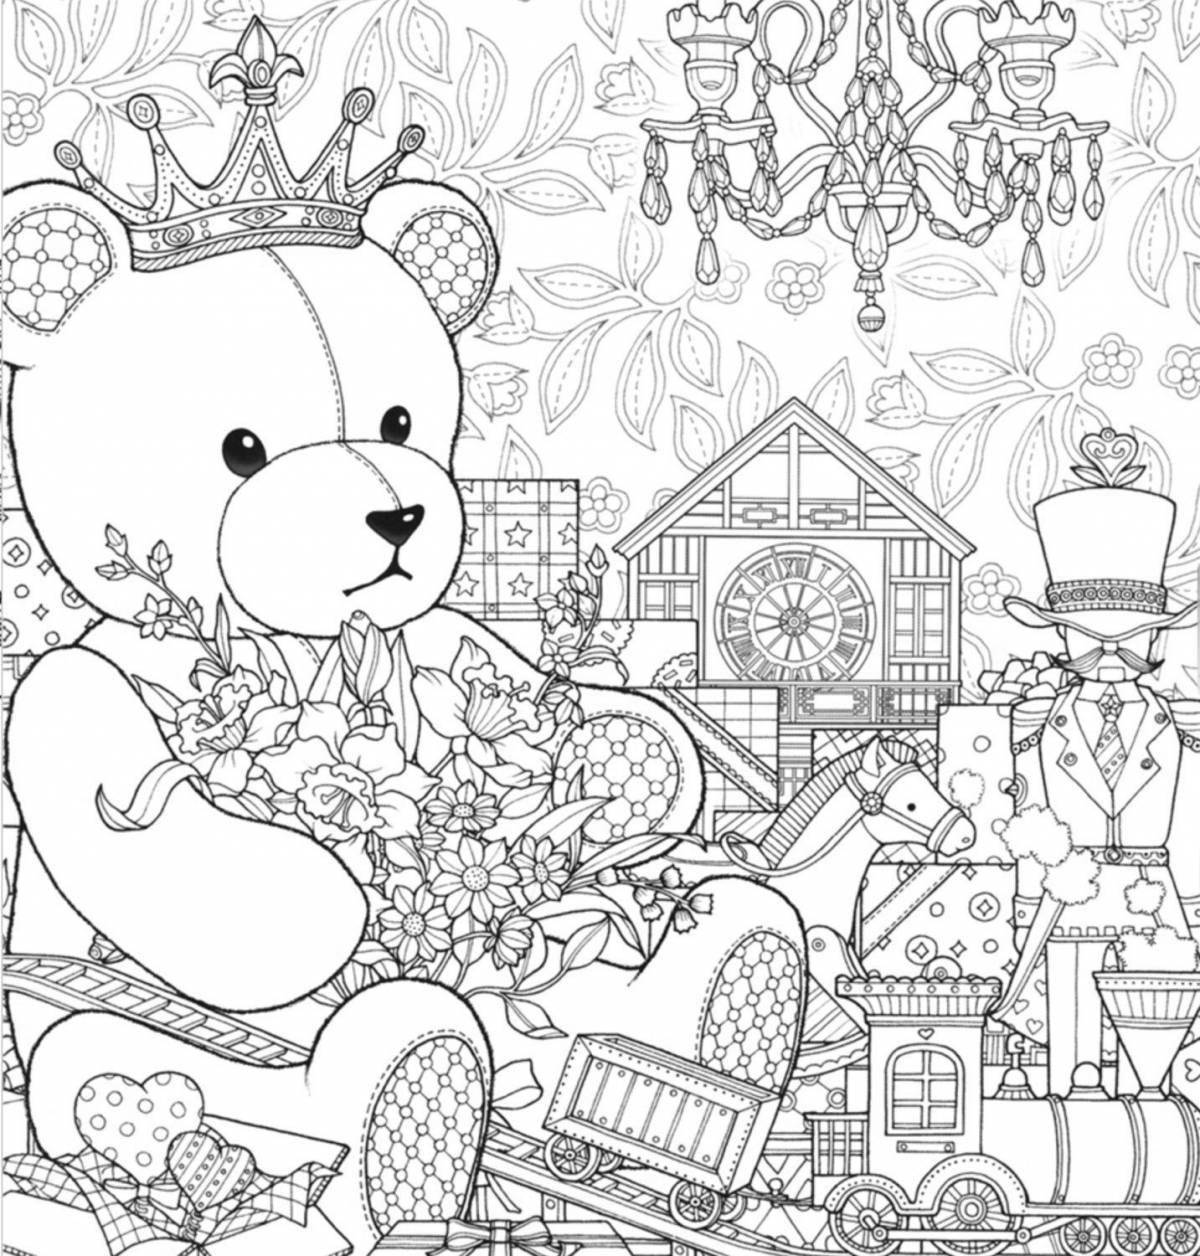 Decorated Christmas coloring book for adults